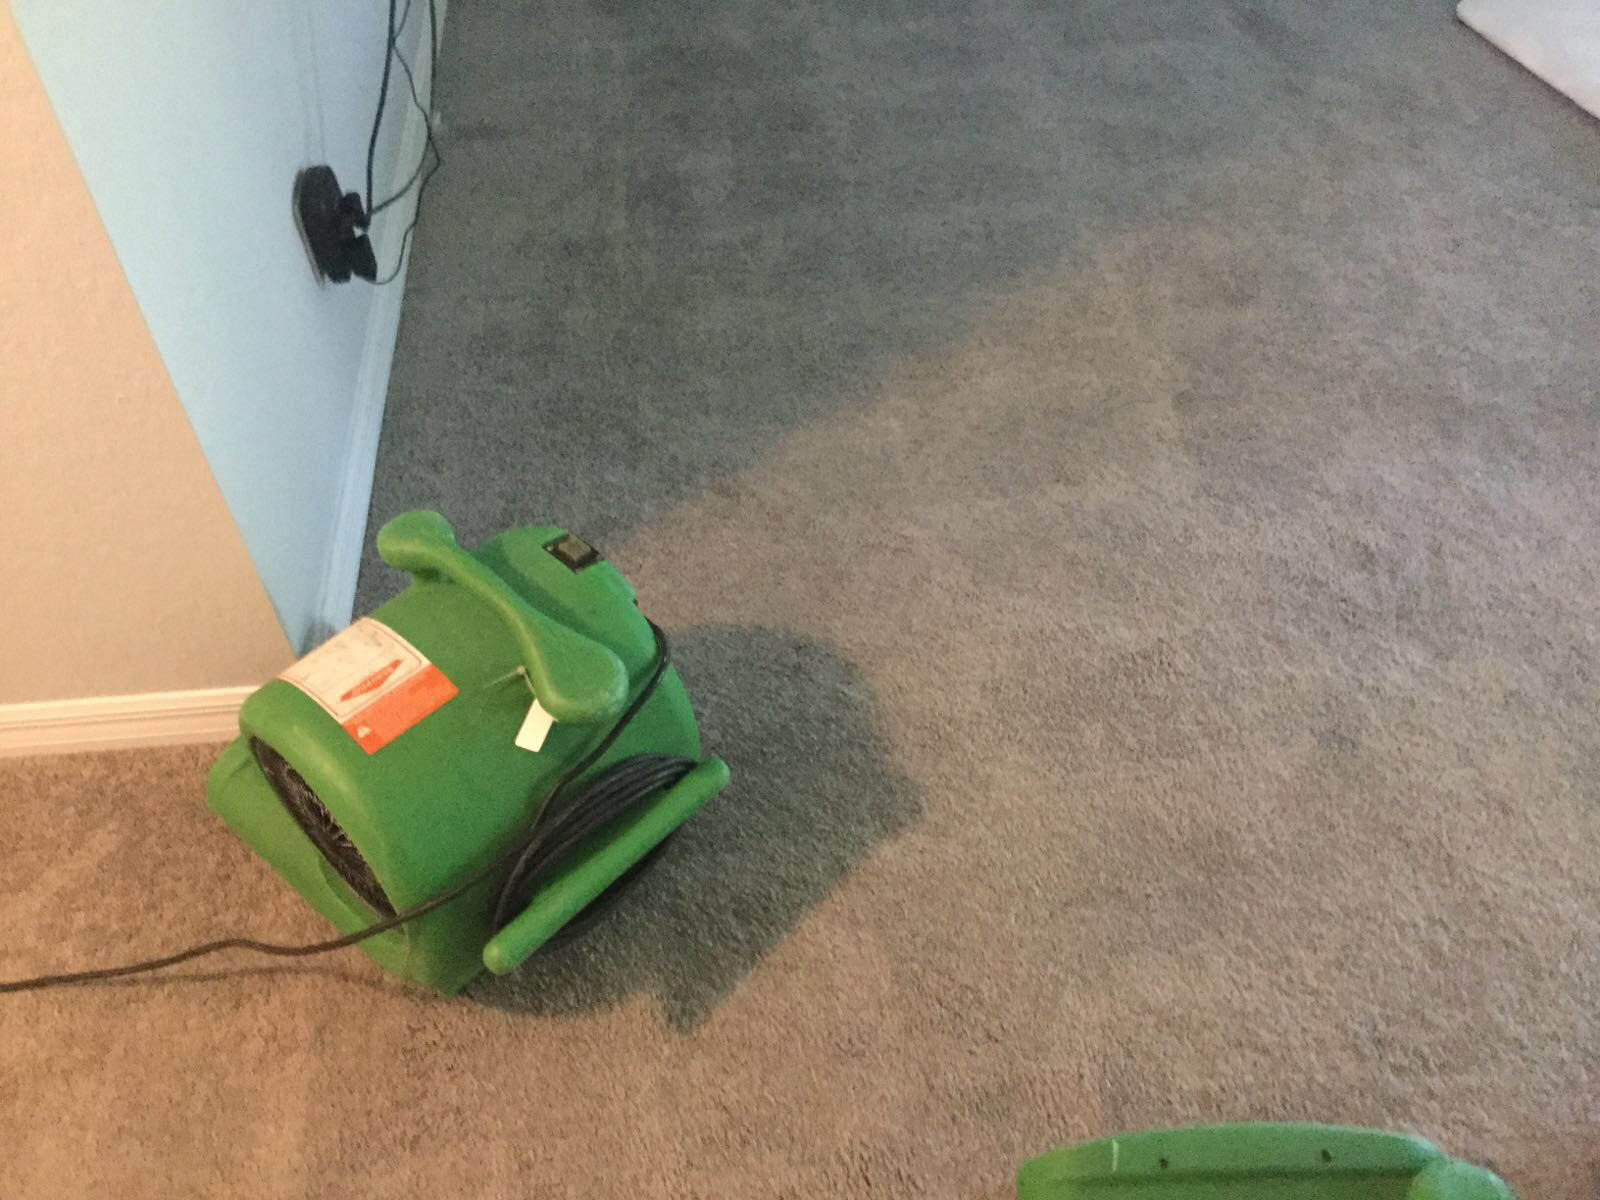 SERVPRO of Cape Coral uses equipment like shown here to dry out floors and more after water damage.